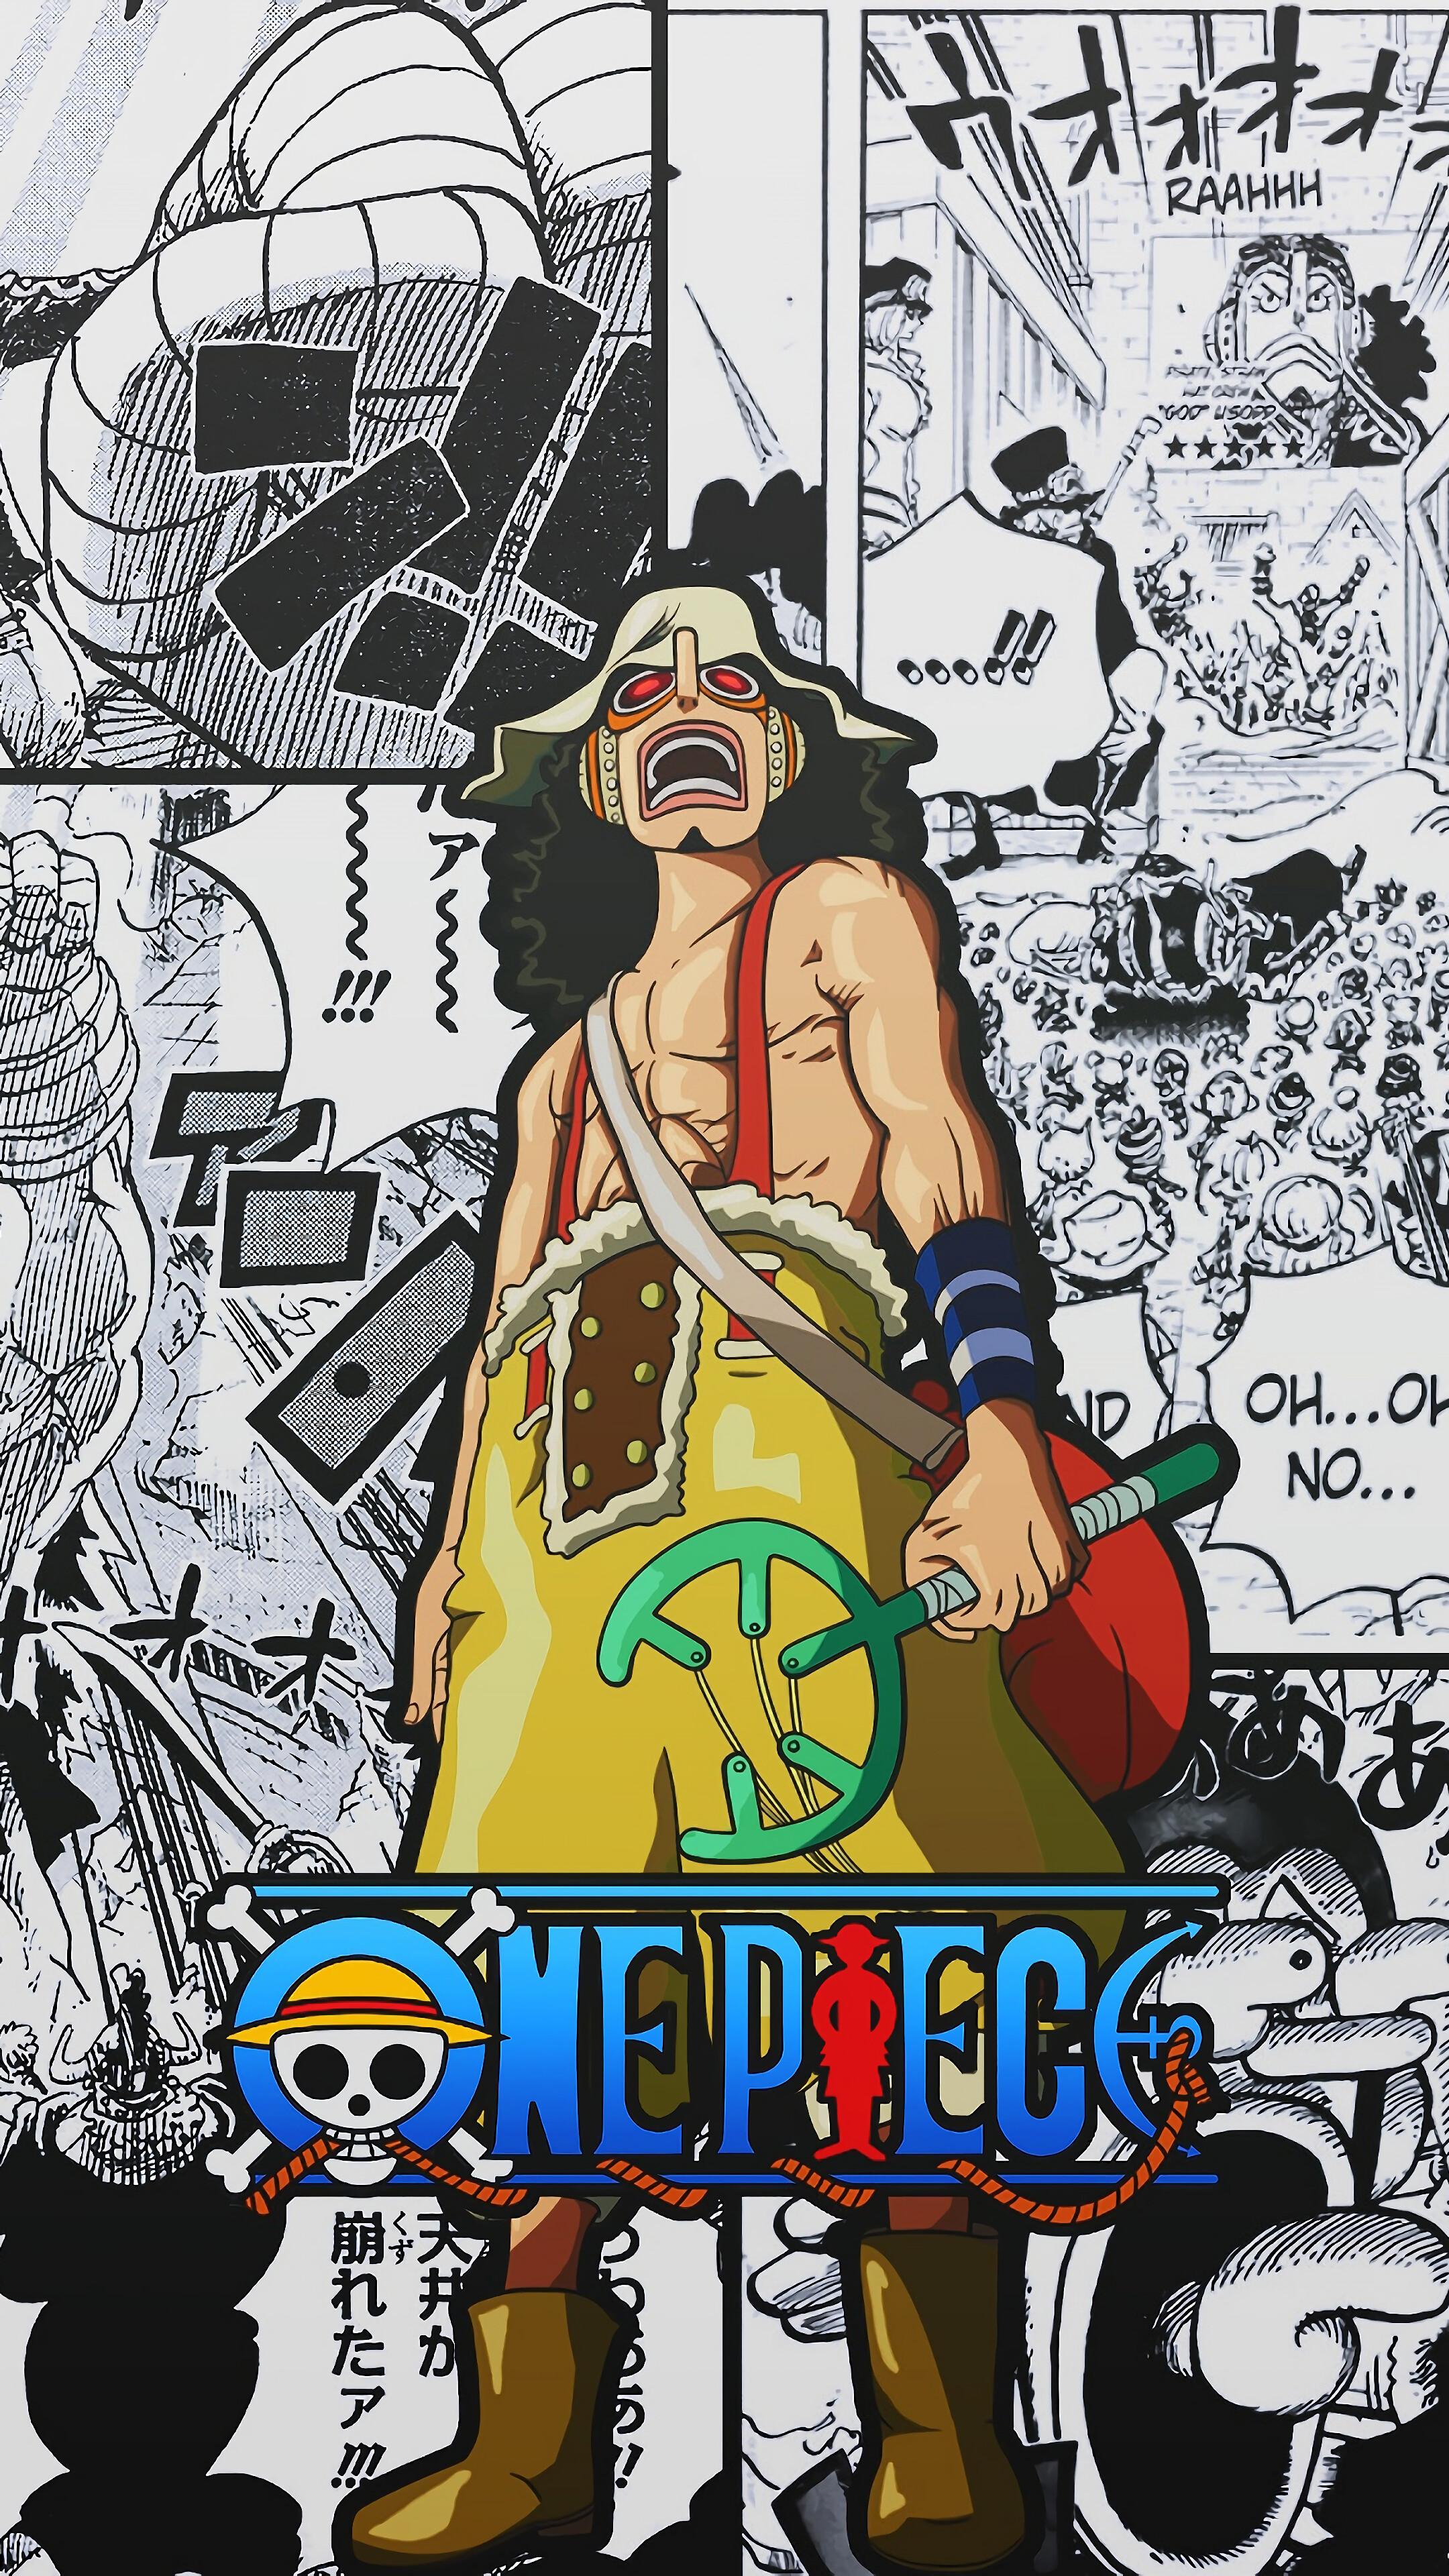 Wallpaper ID 358880  Anime One Piece Phone Wallpaper Usopp One Piece  1080x2340 free download